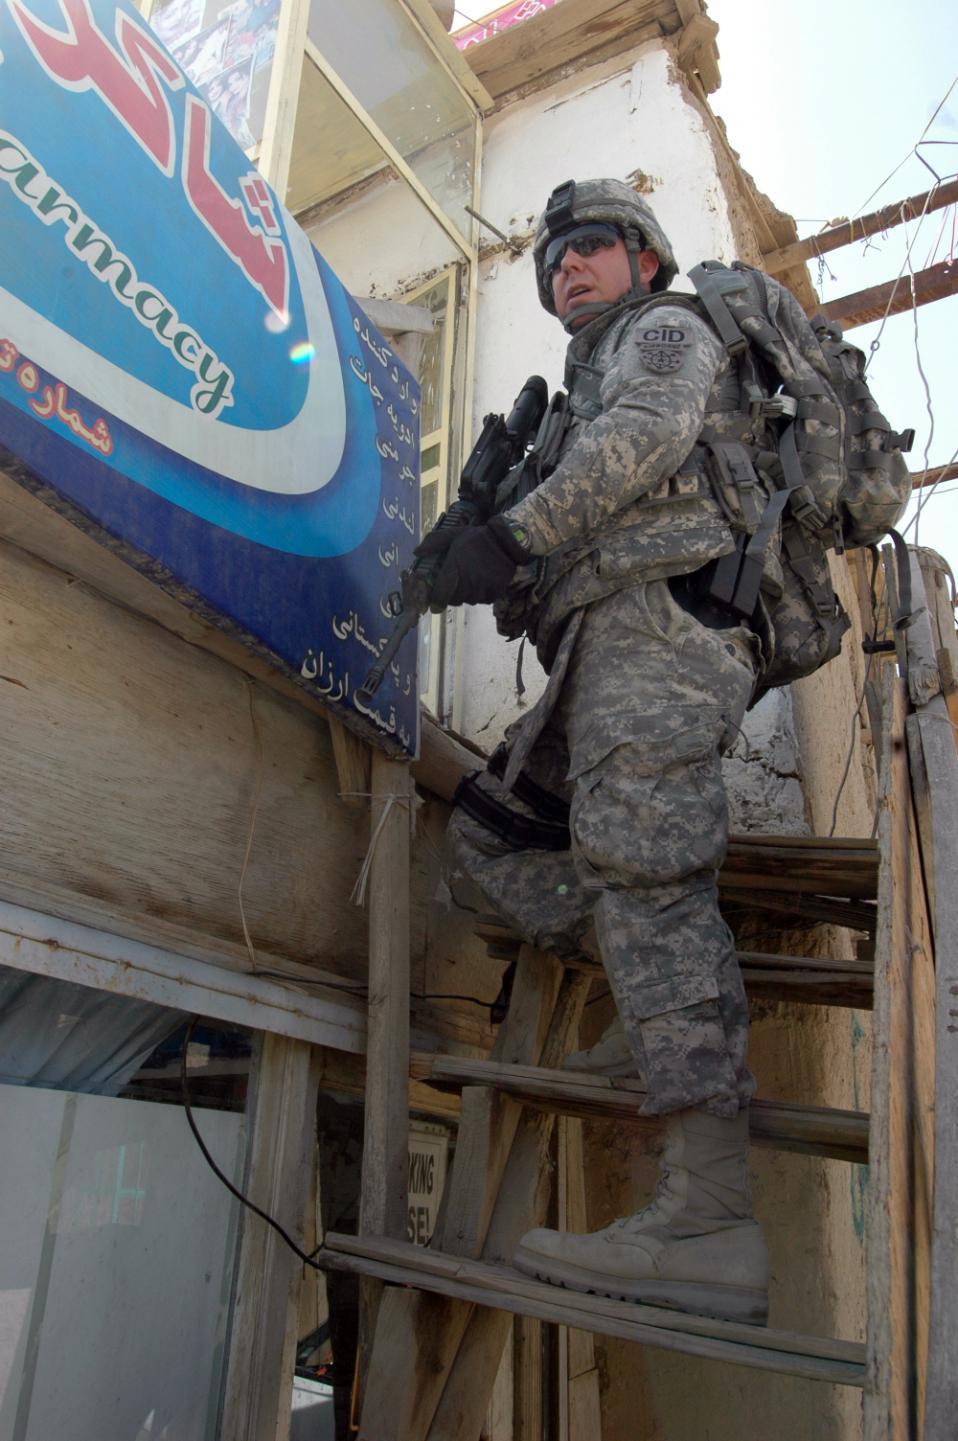 5-5-5 Special Agent Roger Jones, a CID Special Agent assigned to LOGSEC Task Force, conducts a search of an Afghan shop outside of Entry Control